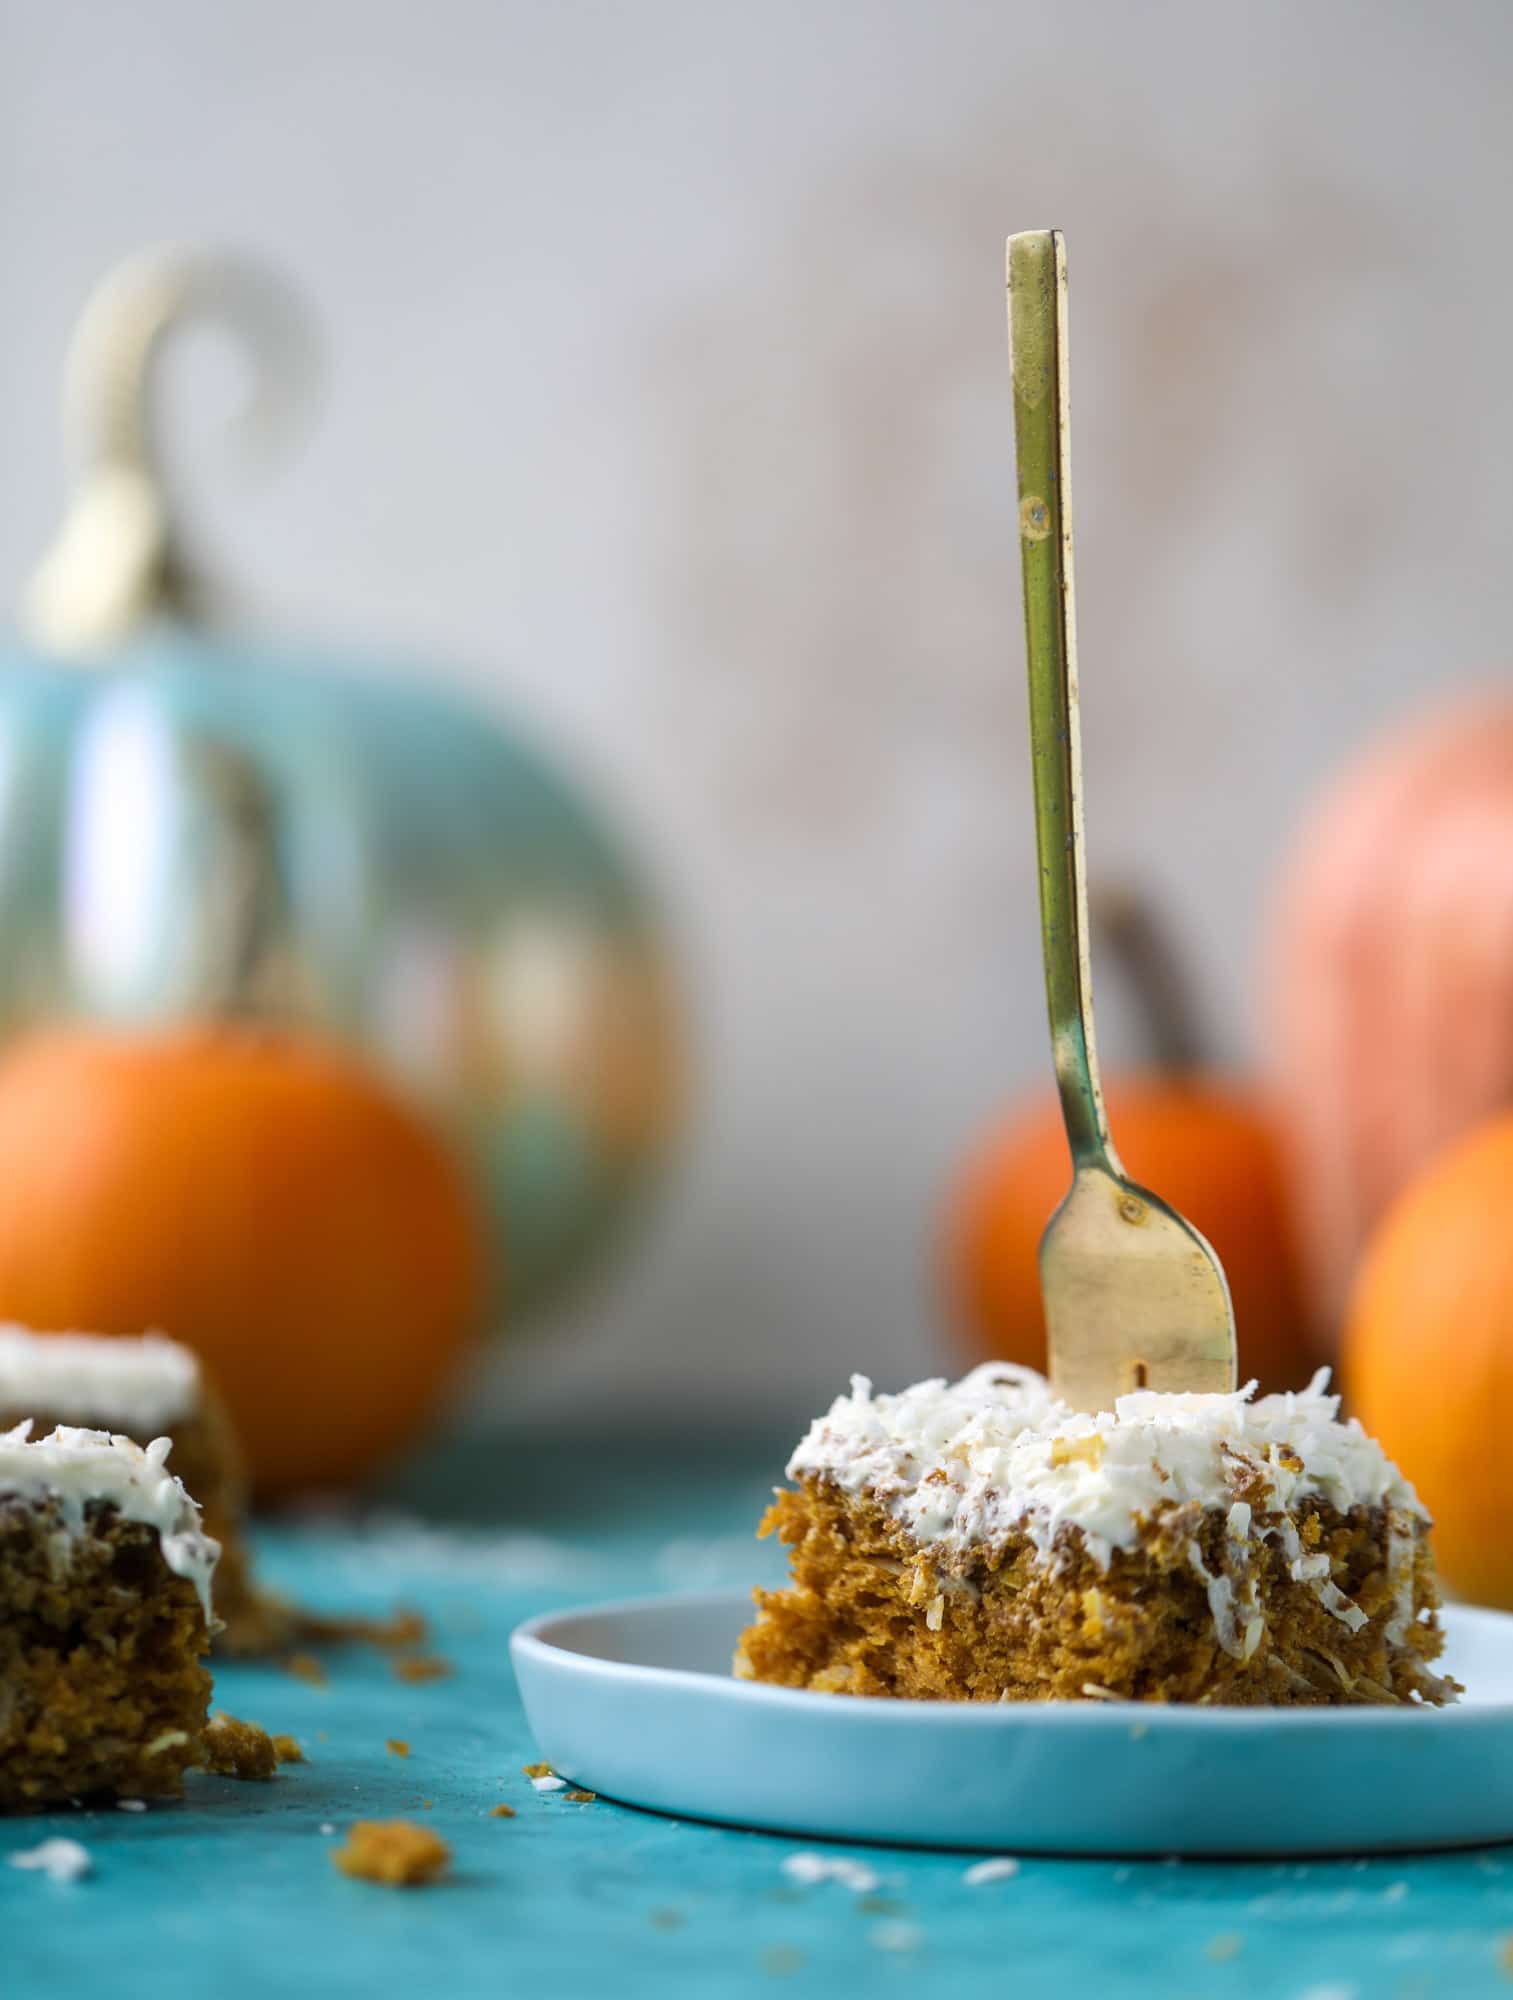 This pumpkin coconut cake is super tender and delicious and comes together quickly in a baking dish! It's spiced for the season and covered in a fluffy coconut cream cheese frosting. You can made it ahead of time for a crowd and it's a huge hit! I howsweeteats.com #pumpkin #cake